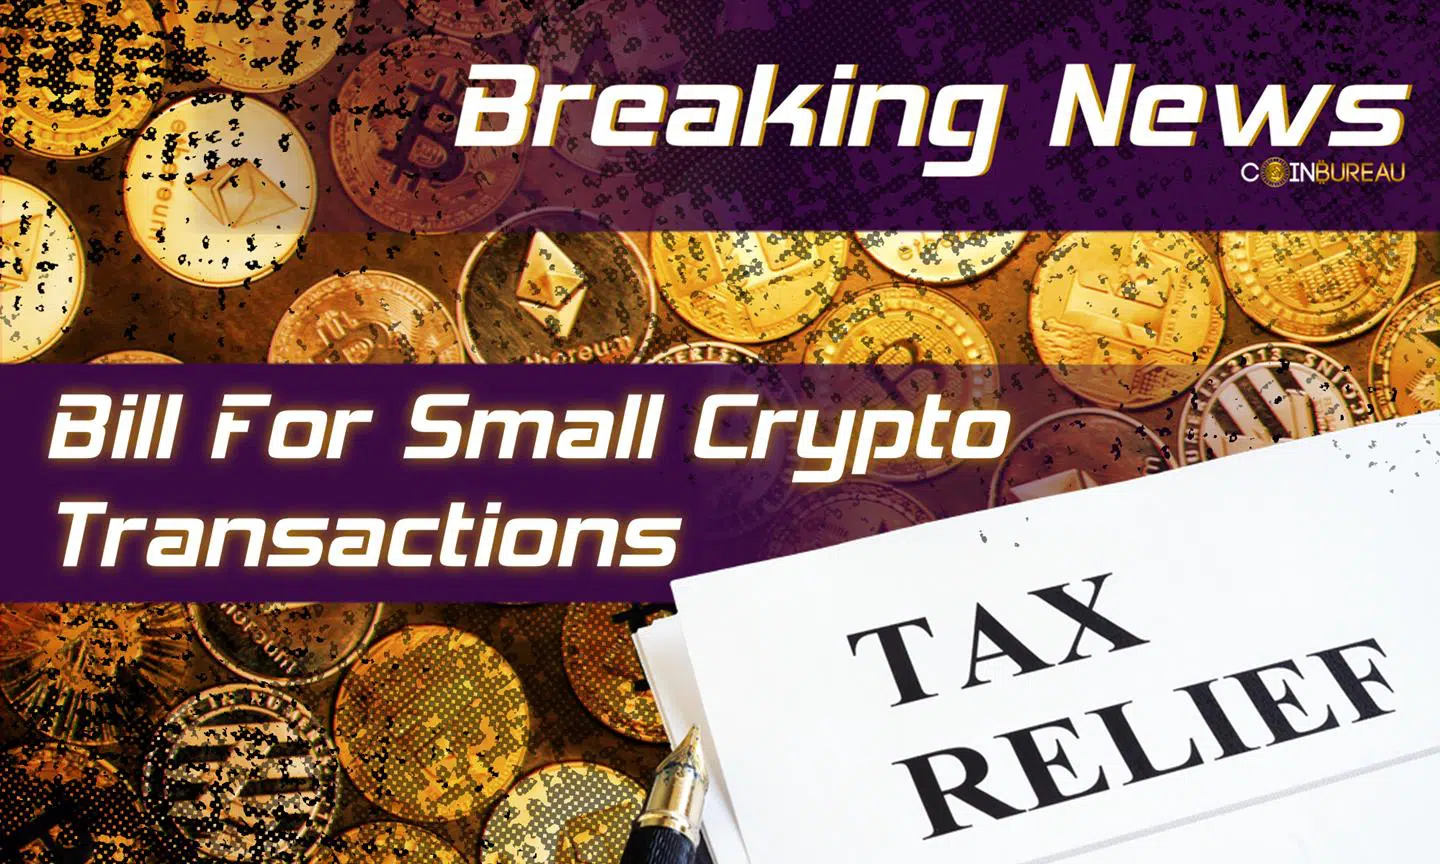 US Officials Reintroduce Tax Relief Bill For Small Crypto Transactions